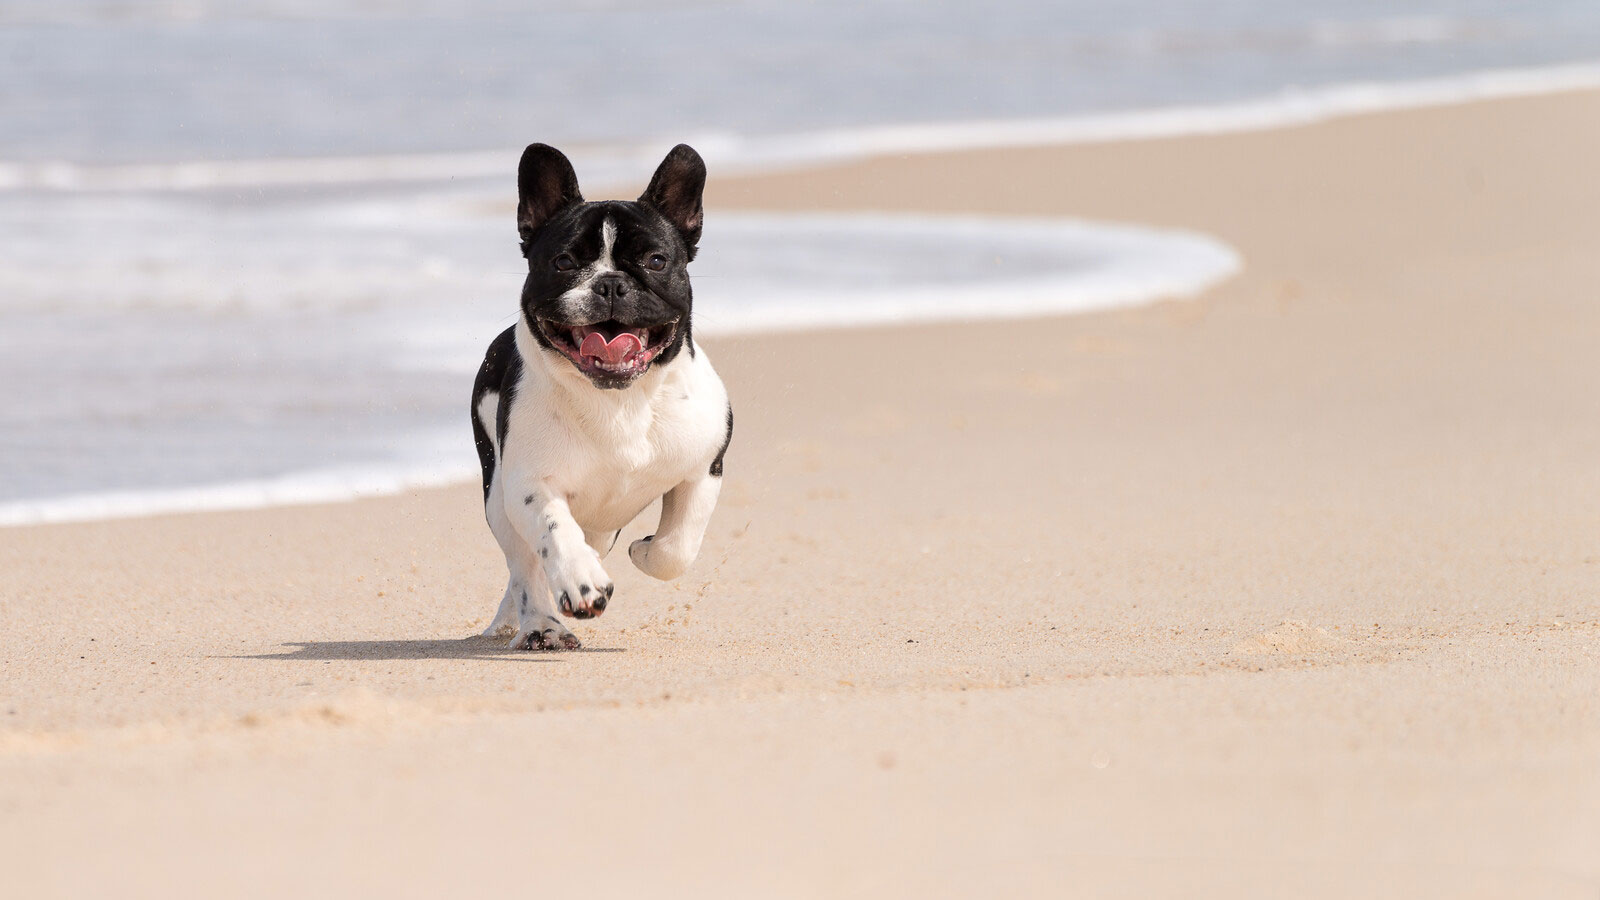 dog running on beach dog poop removal service